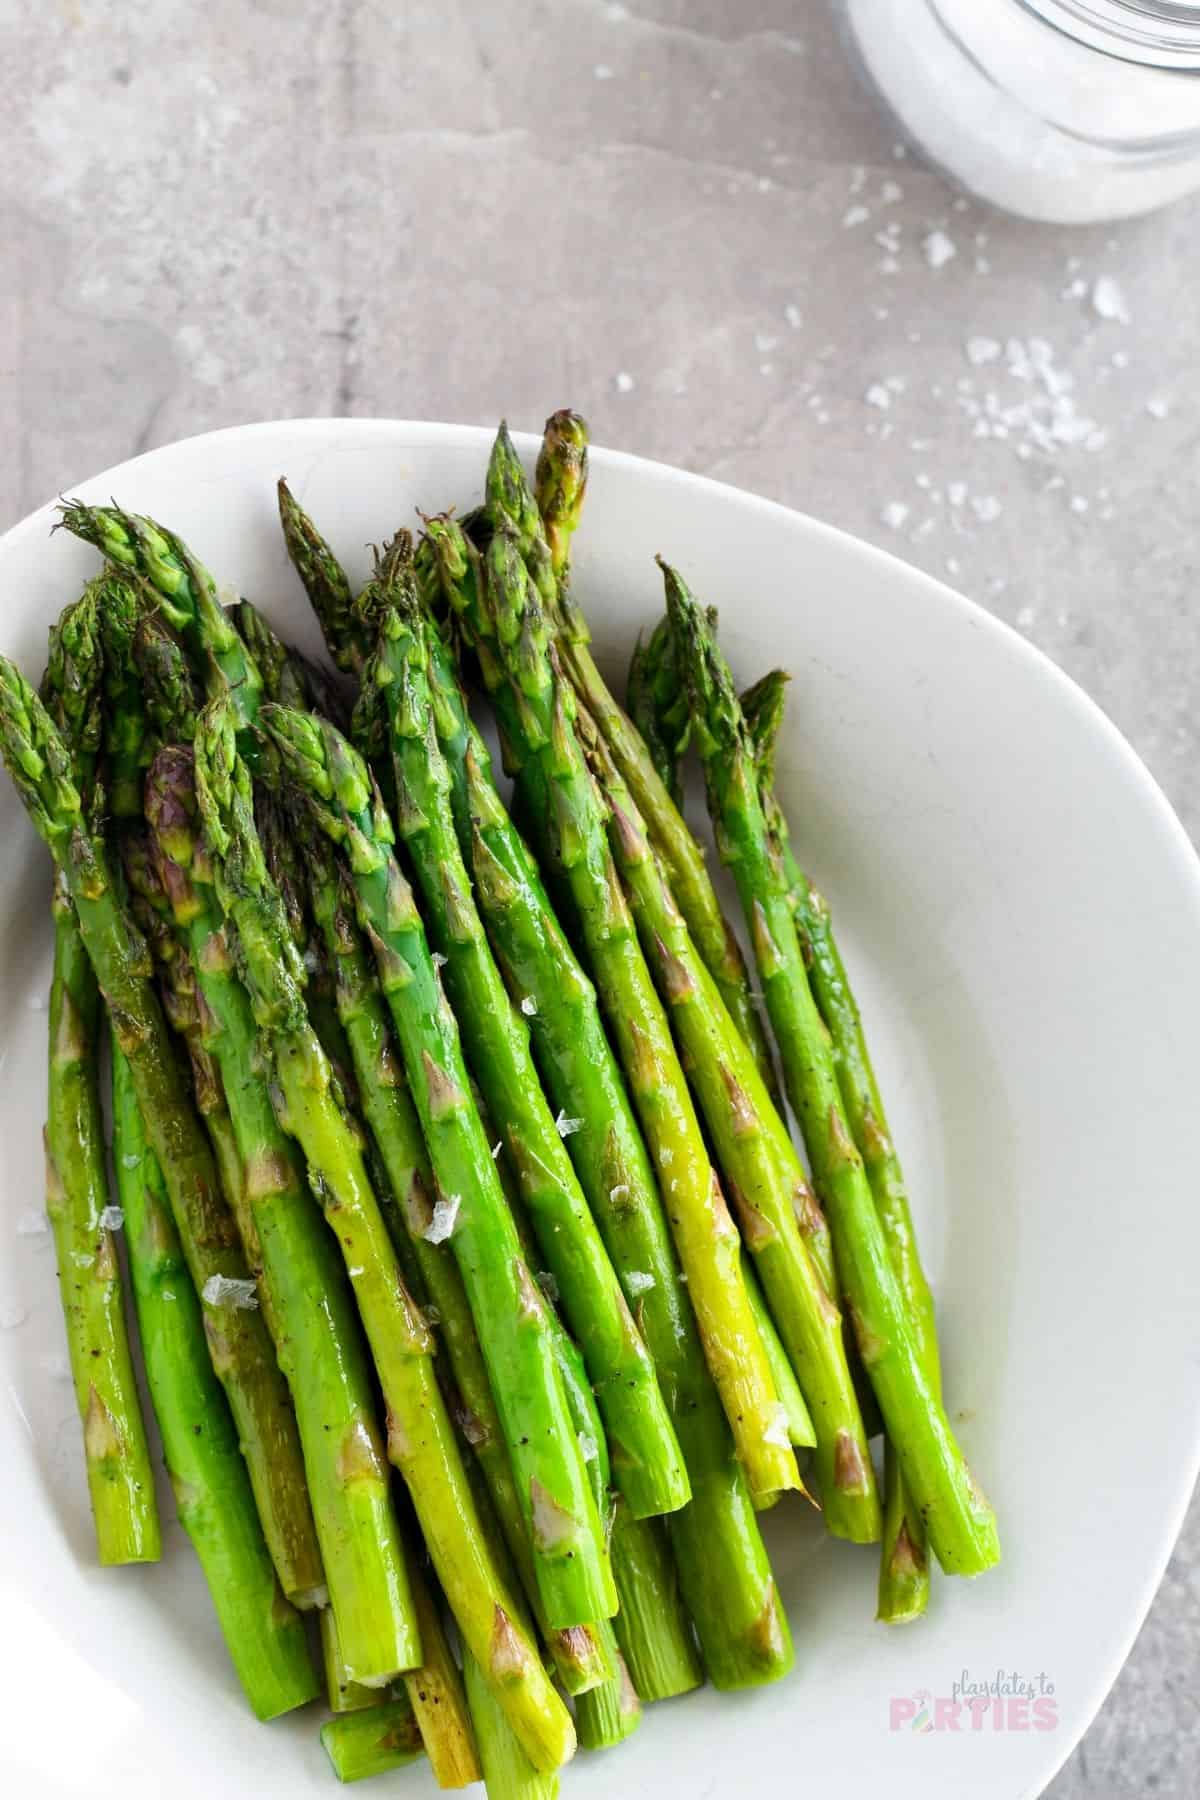 A pile of roasted asparagus spears ready to eat.